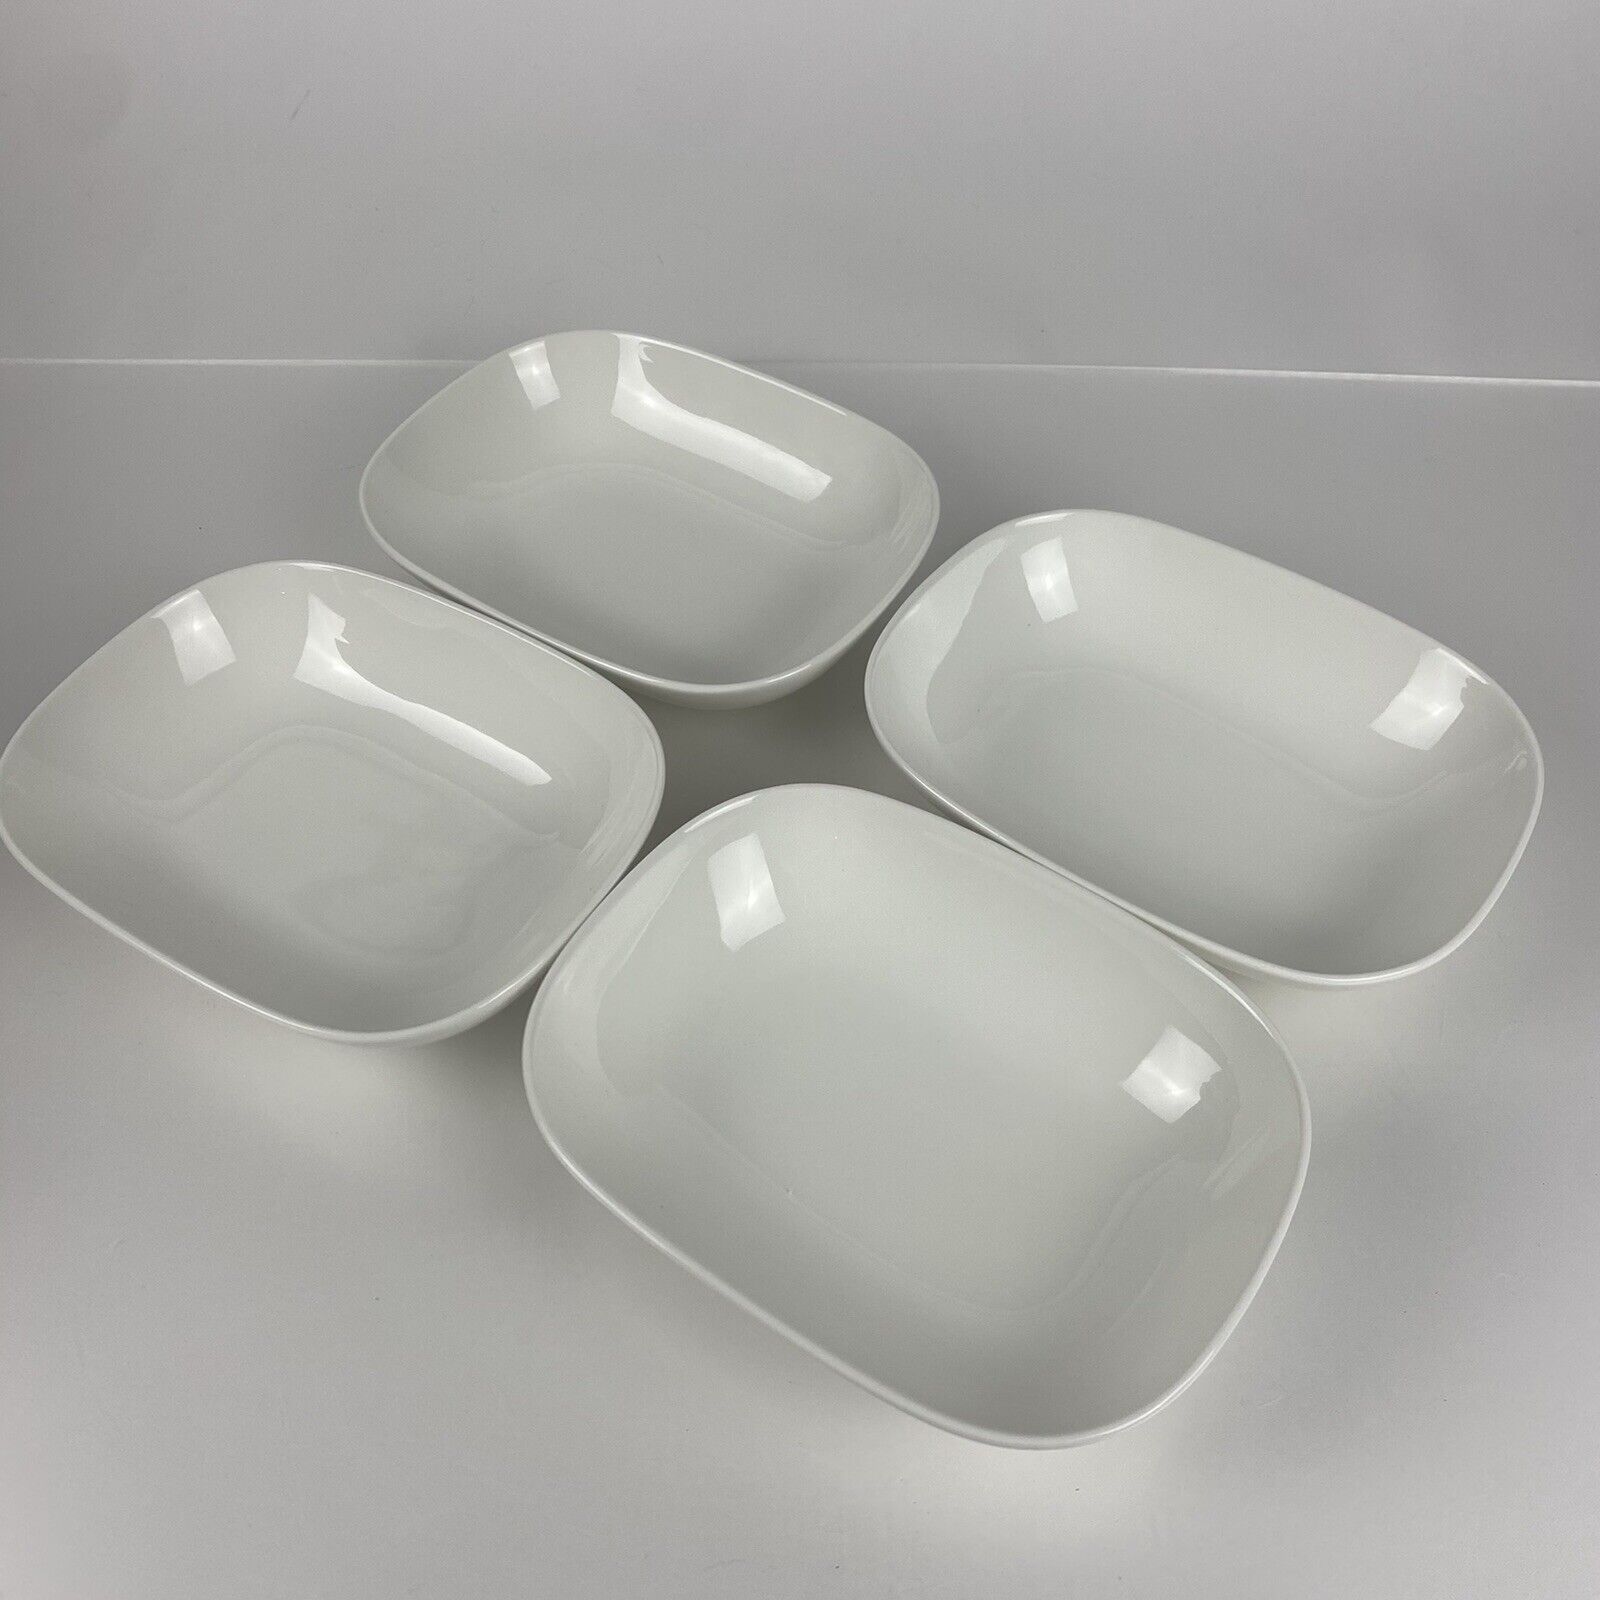 4 New Extra Large White Ceramic Bowl - Alessi For Delta  - 8